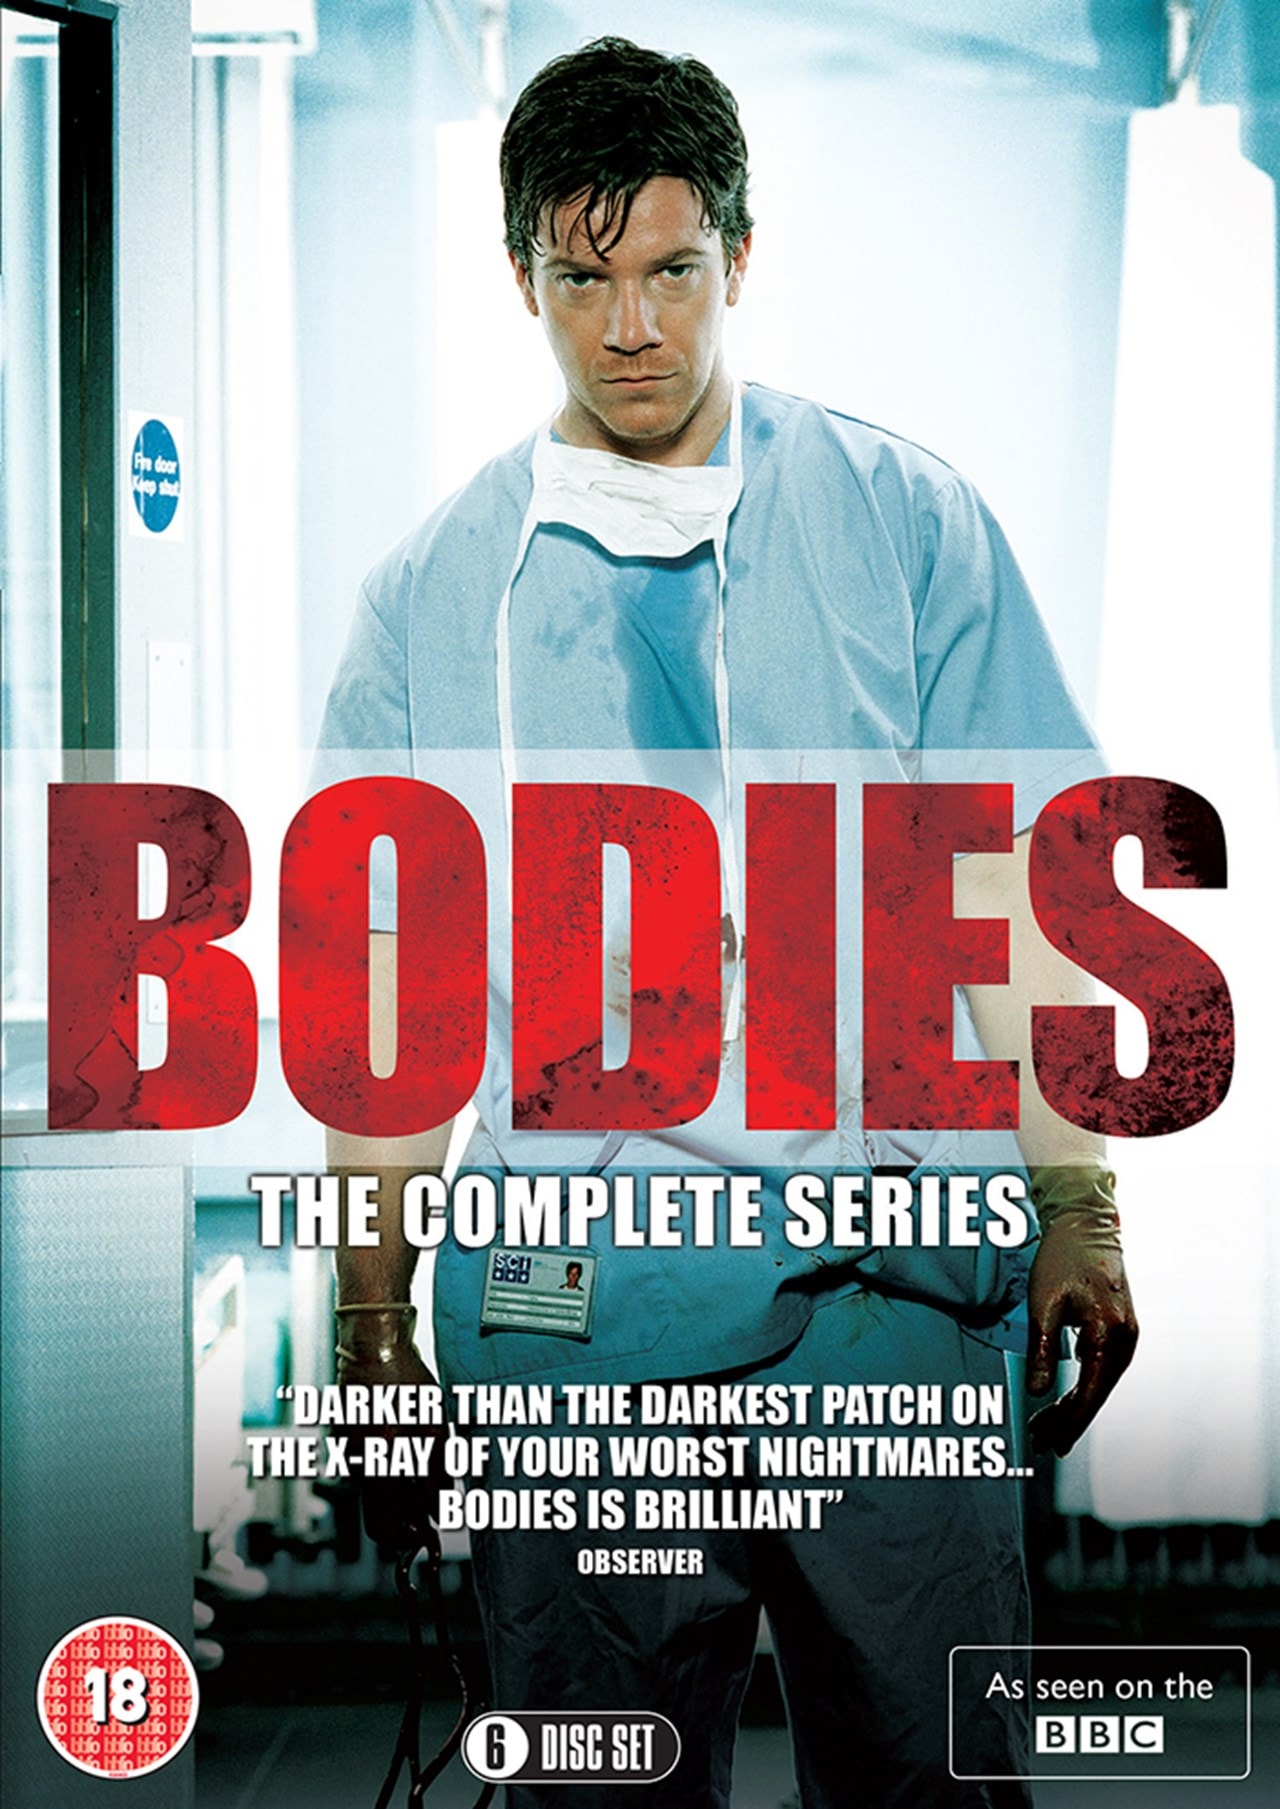 Bodies The Complete Series DVD Box Set Free shipping over £20